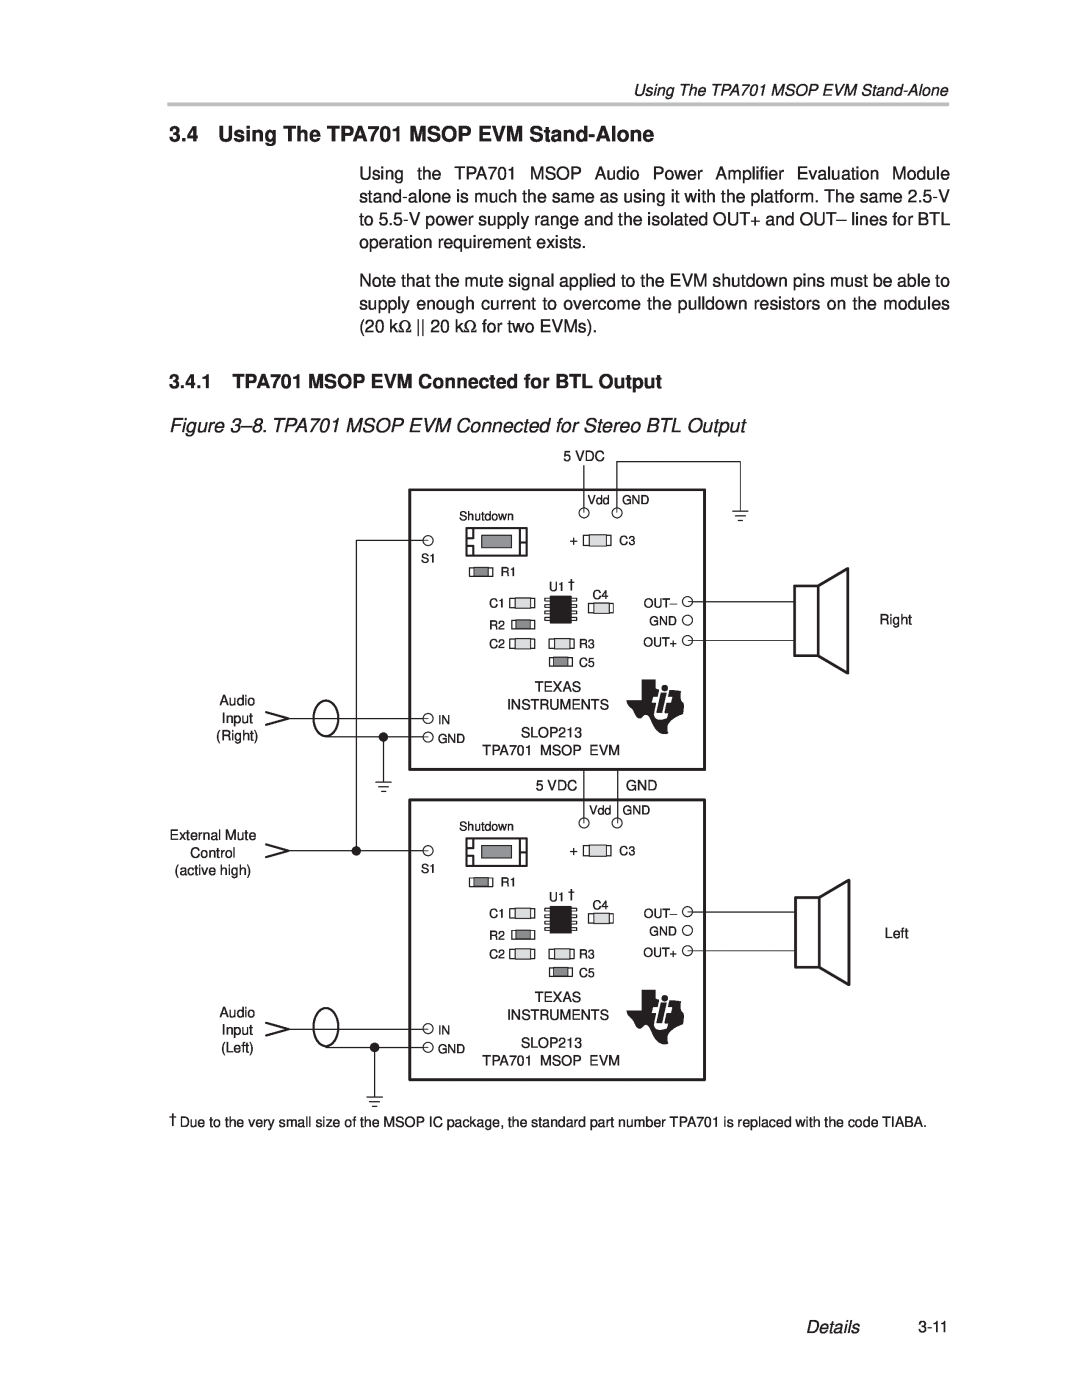 Texas Instruments manual Using The TPA701 MSOP EVM Stand-Alone, 3.4.1TPA701 MSOP EVM Connected for BTL Output, Details 